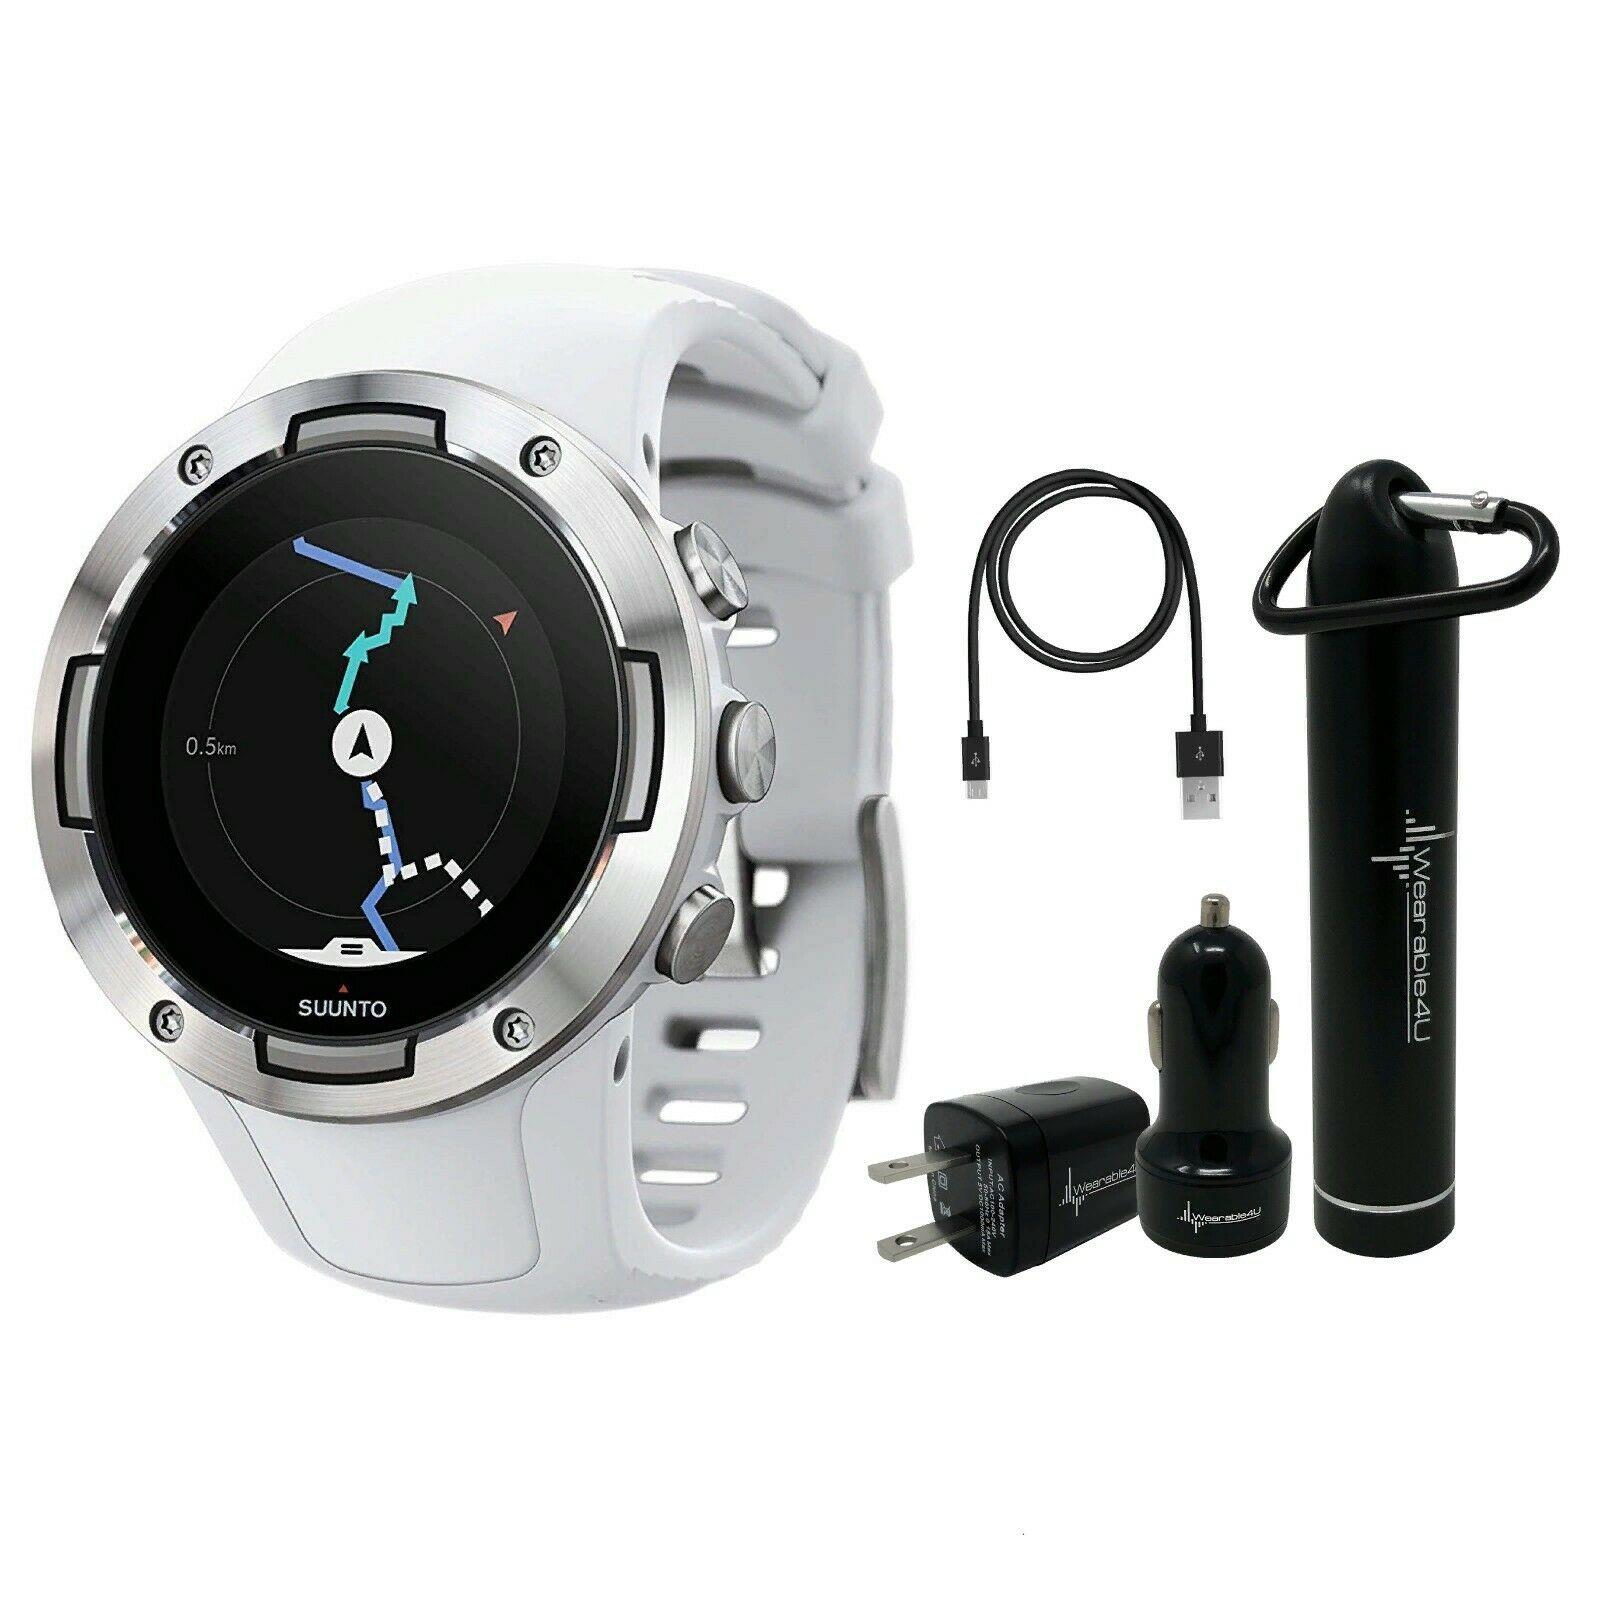 Suunto 5 Multisport Gps Watch G1 with Included Wearable4U Power Pack White